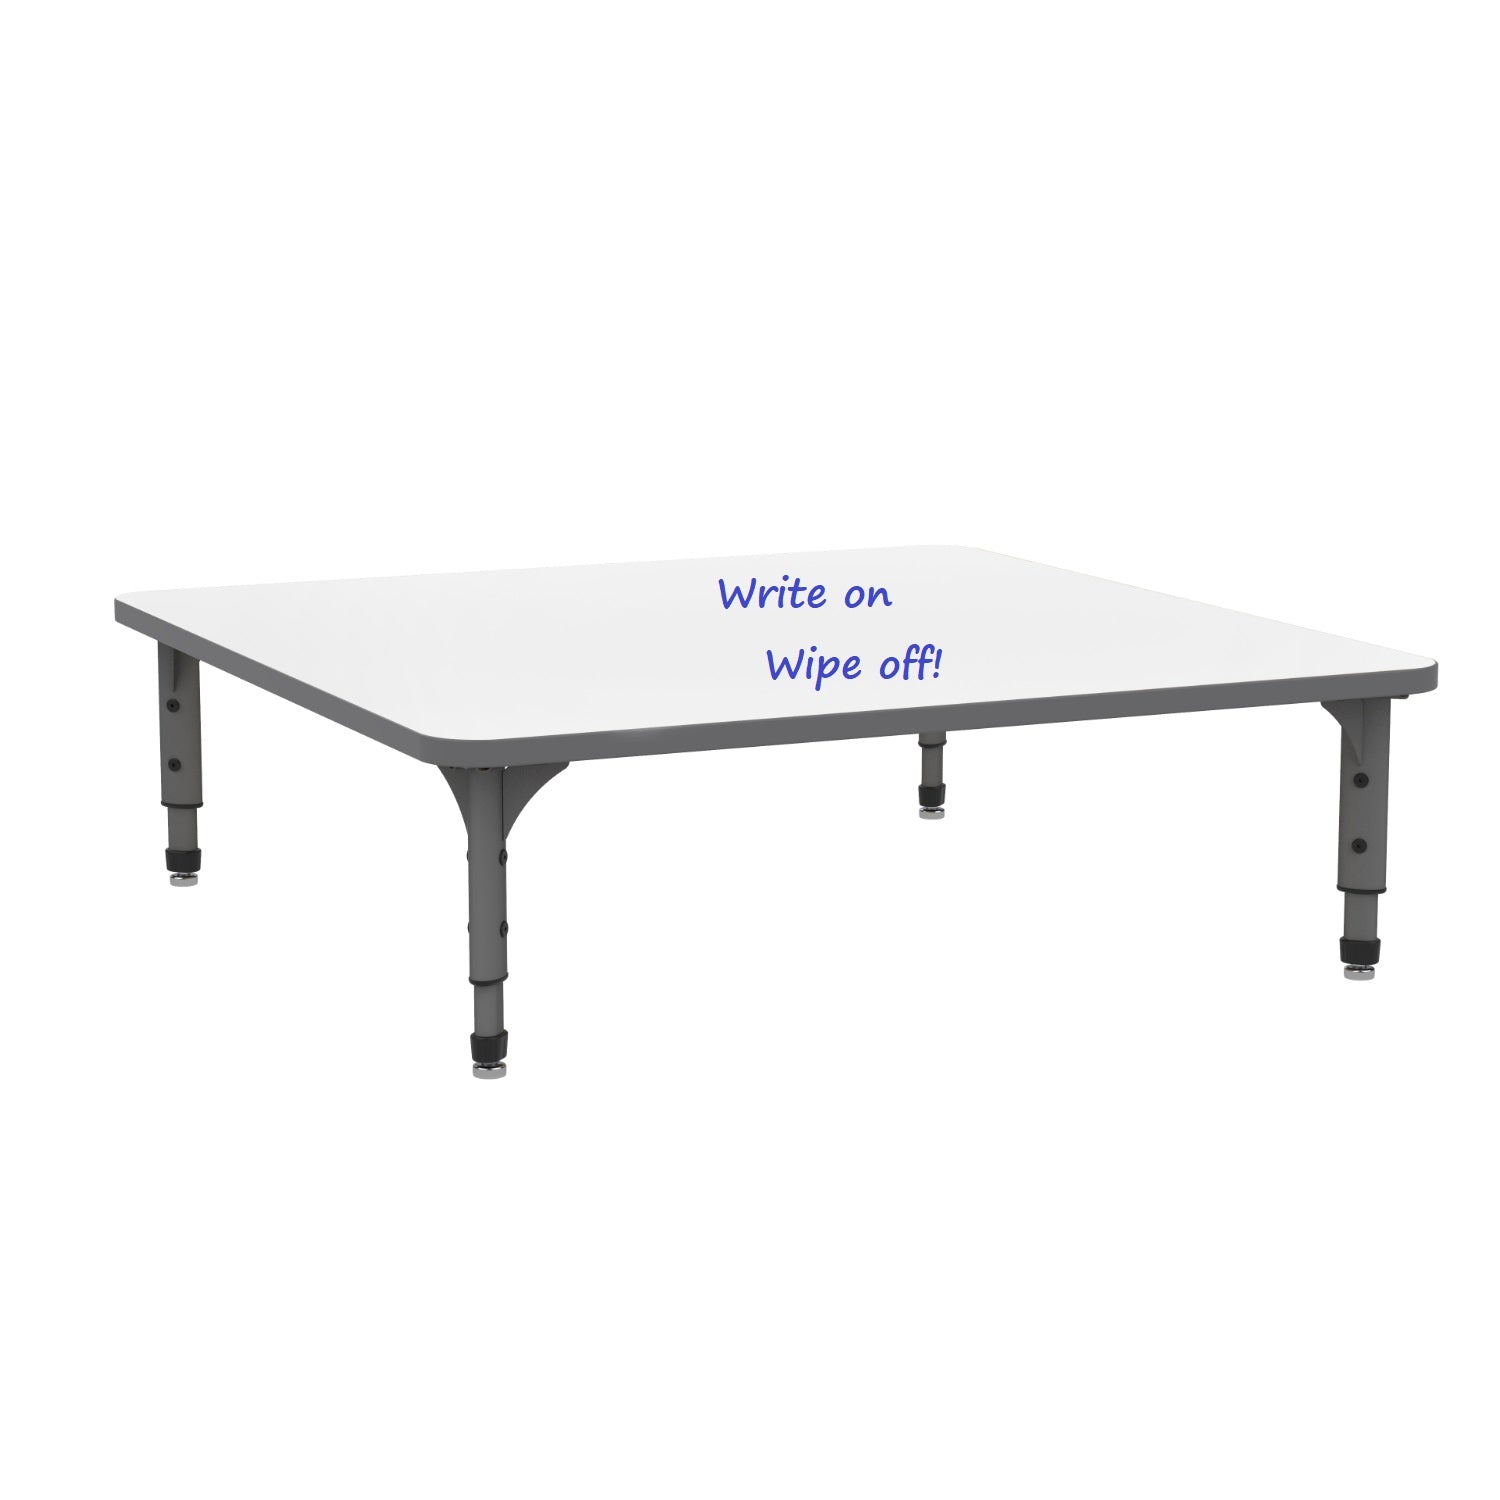 Adjustable Height Floor Activity Table with White Dry-Erase Markerboard Top, 48" Square